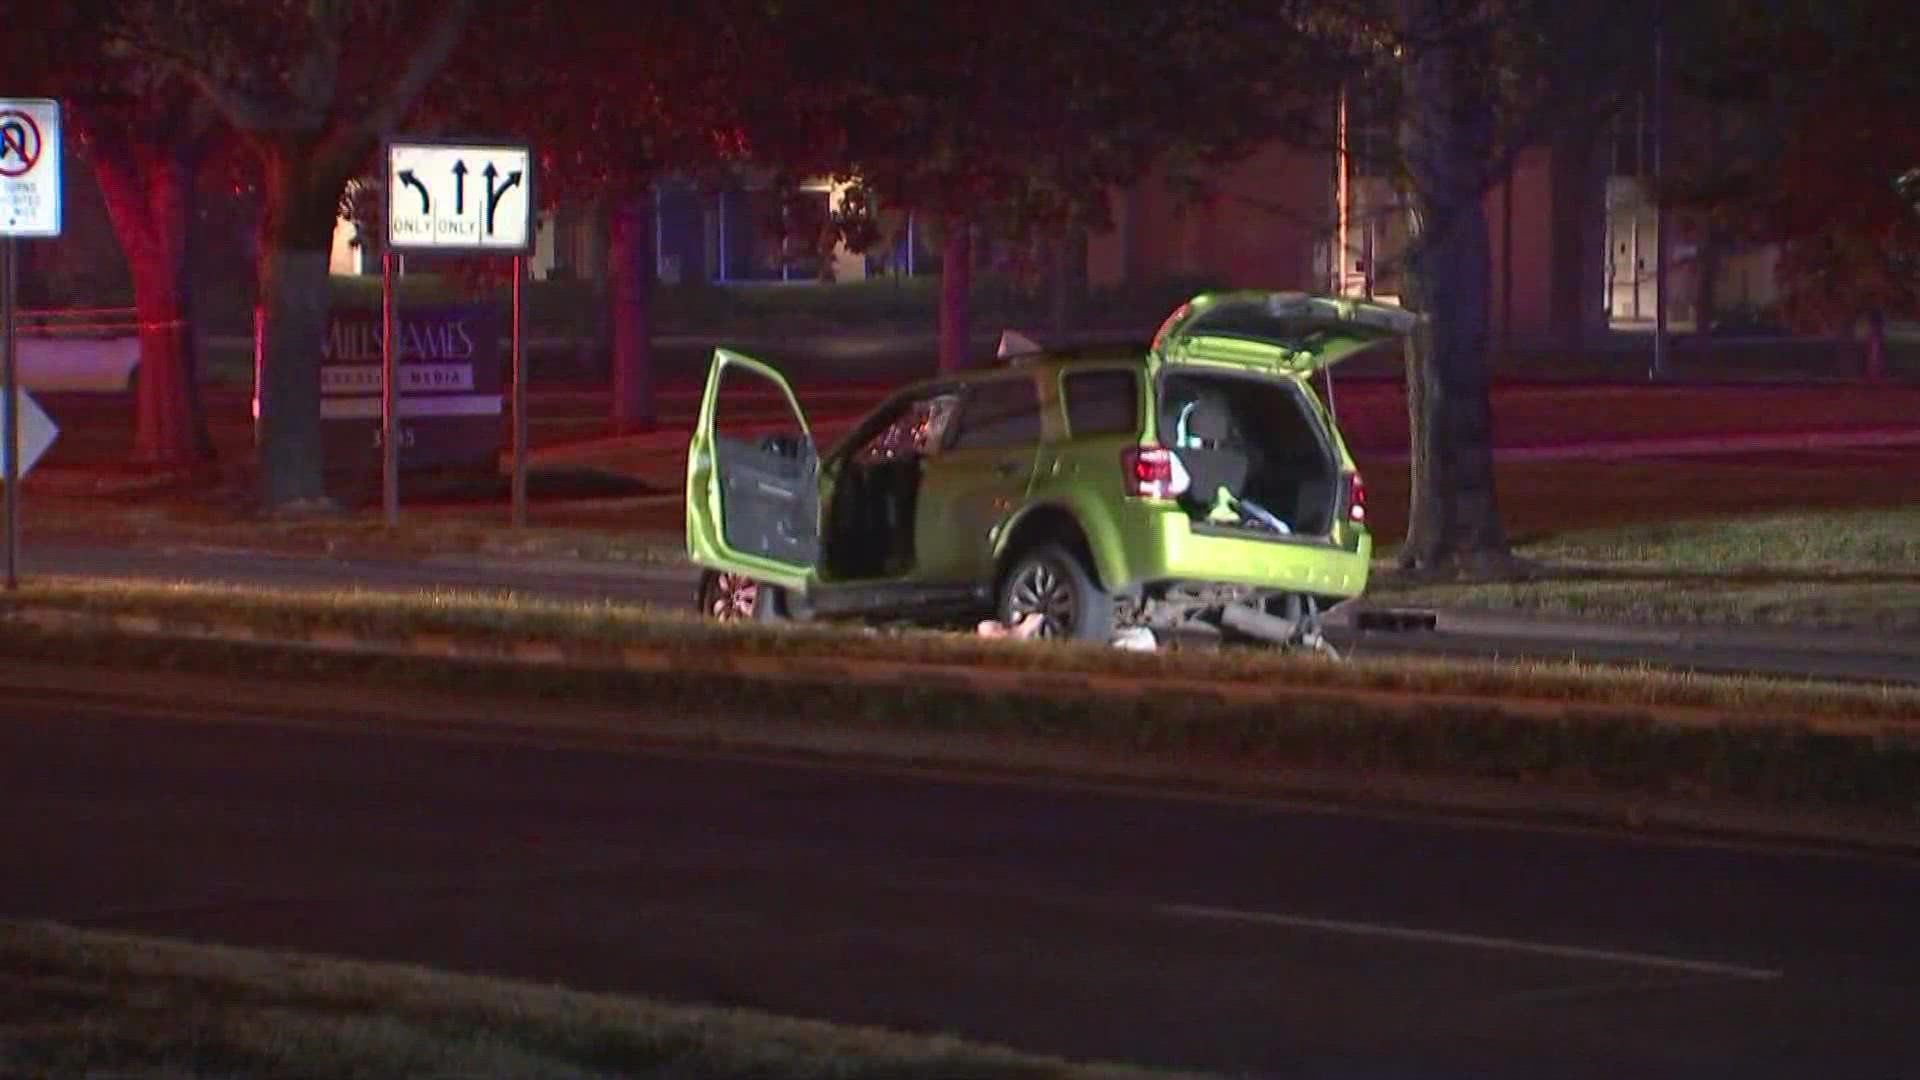 The Hilliard Division of Police said the crash happened just before 2:55 a.m. on Fishinger Road.